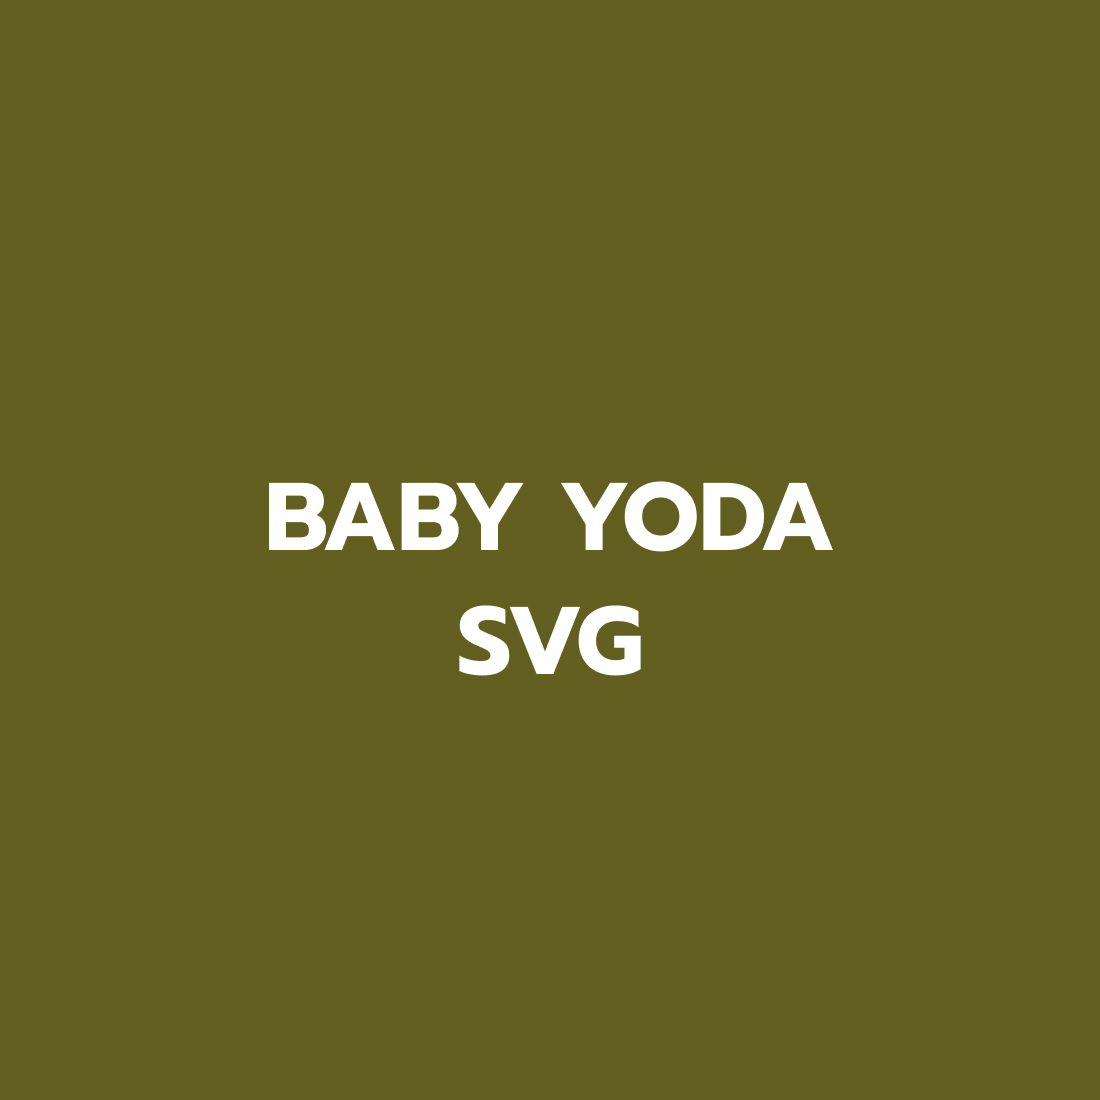 Free Baby Yoda SVG preview.